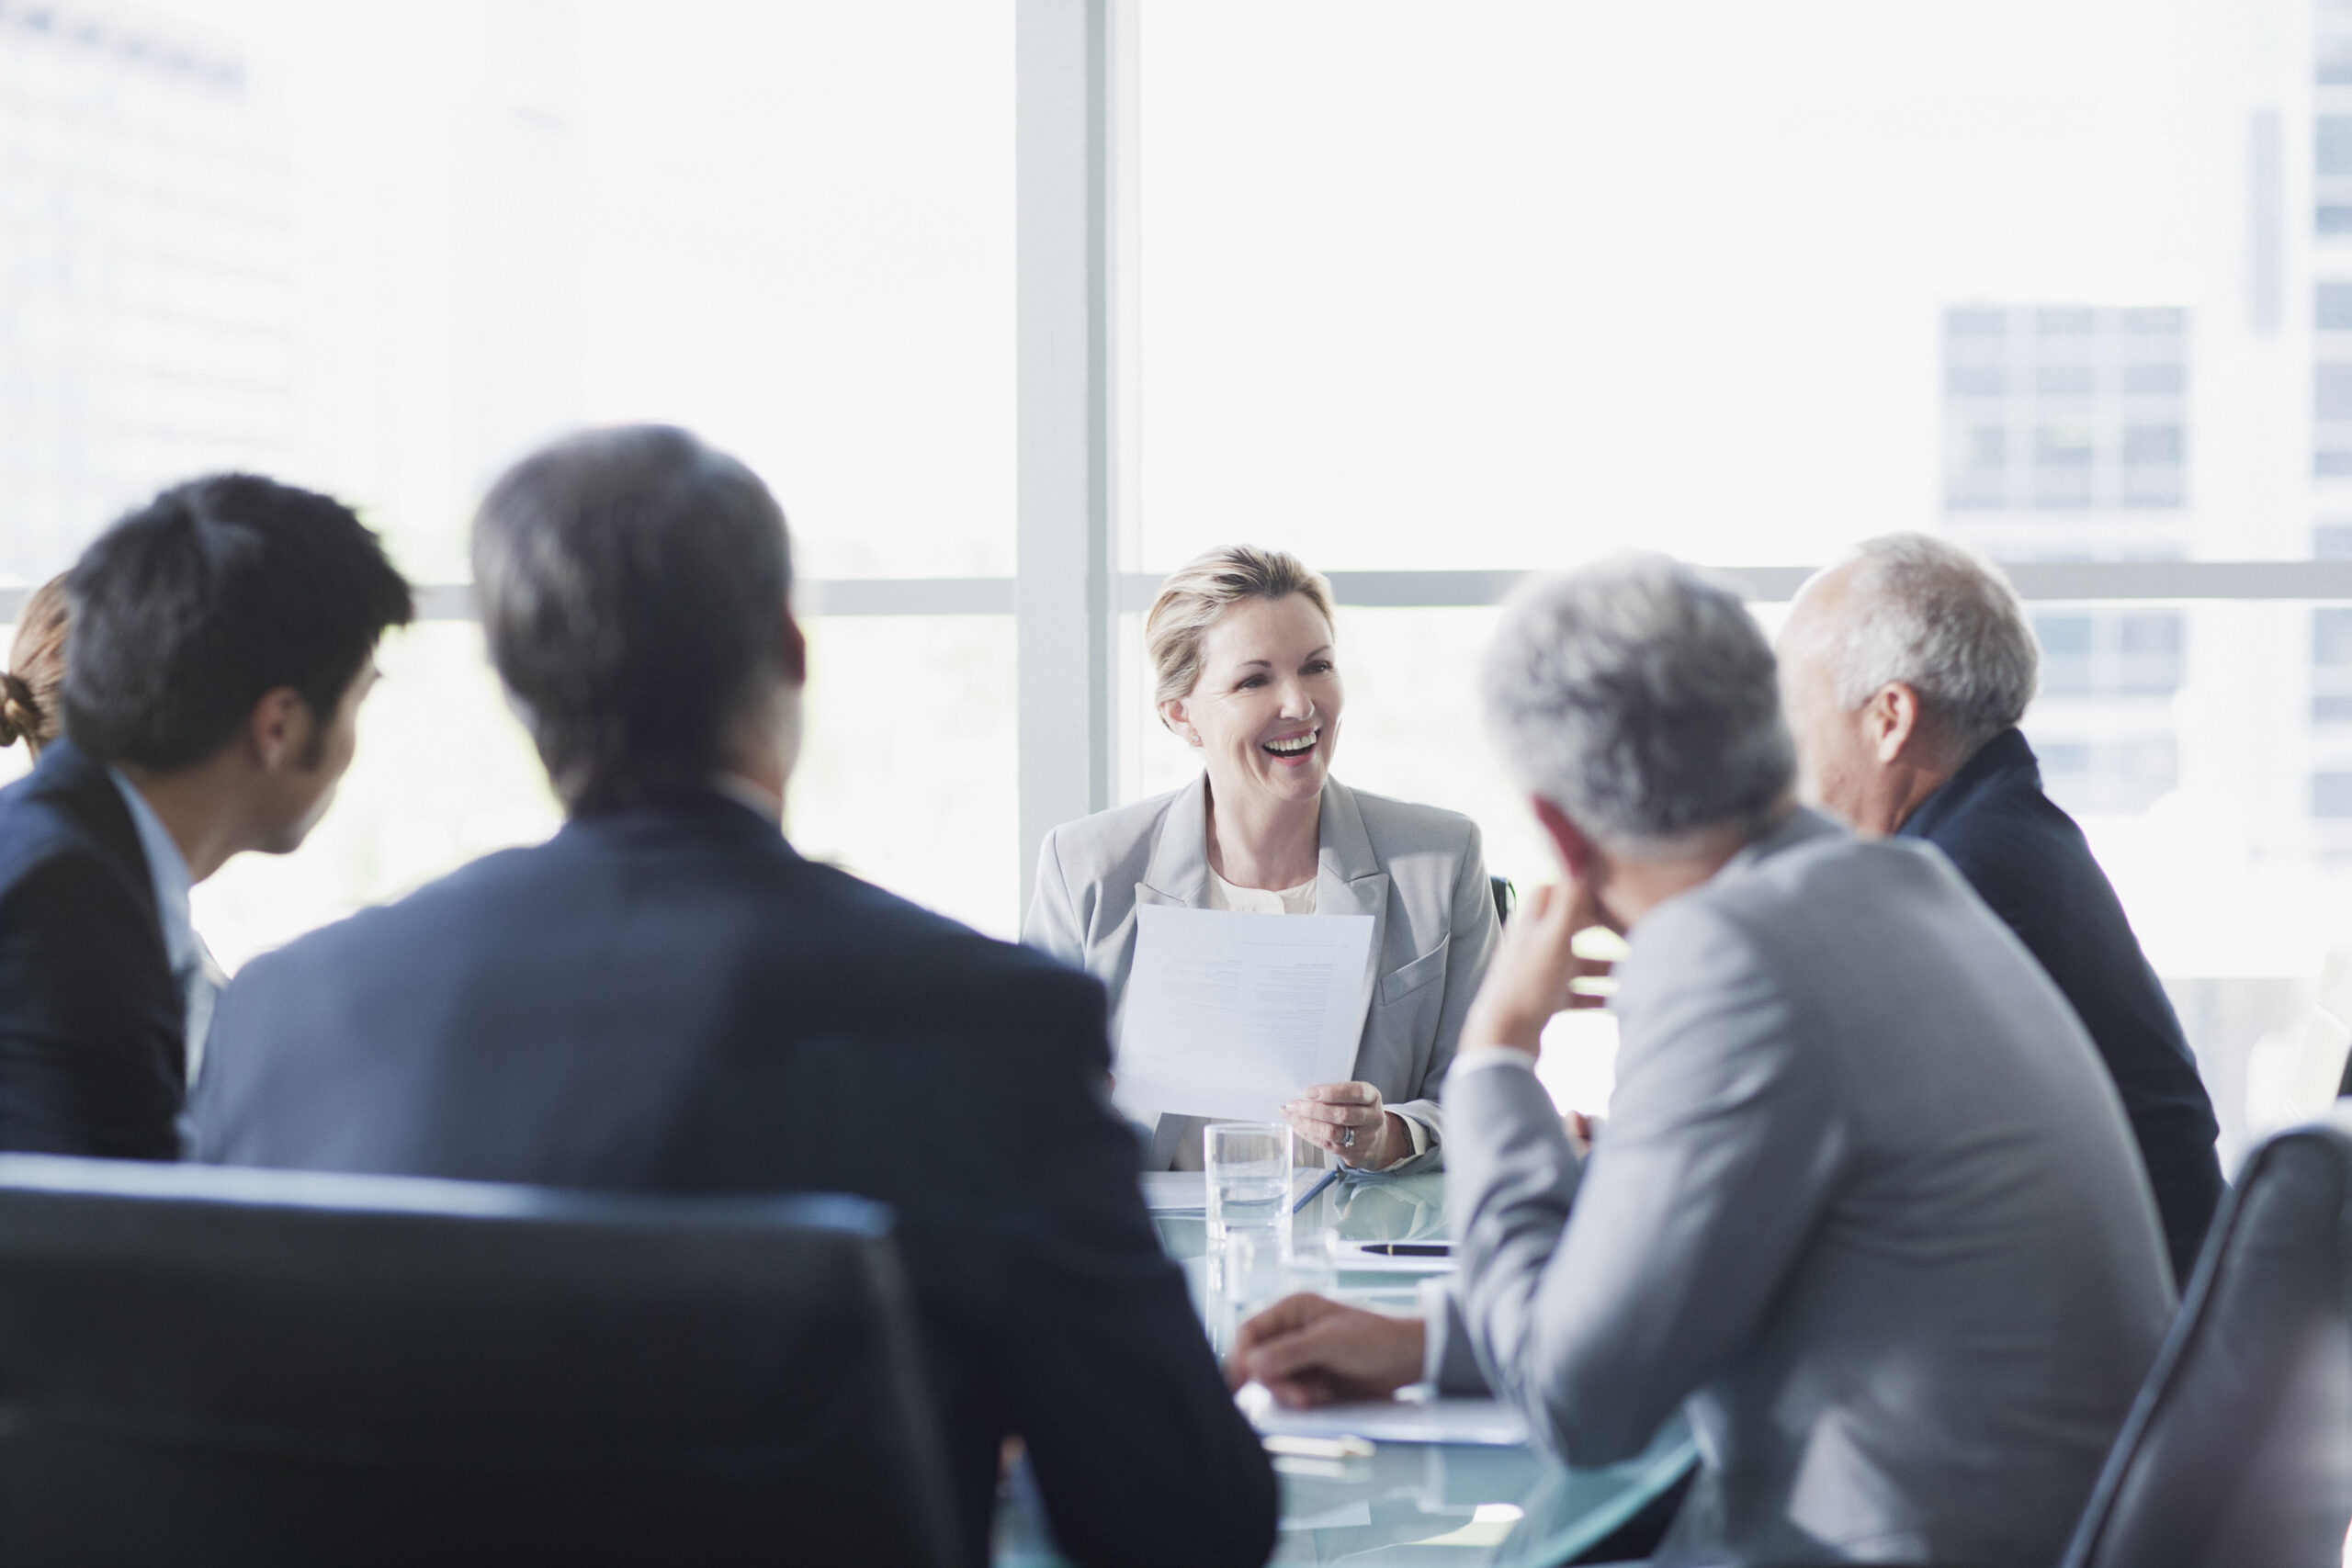 Smiling businesswoman leading meeting in conference room